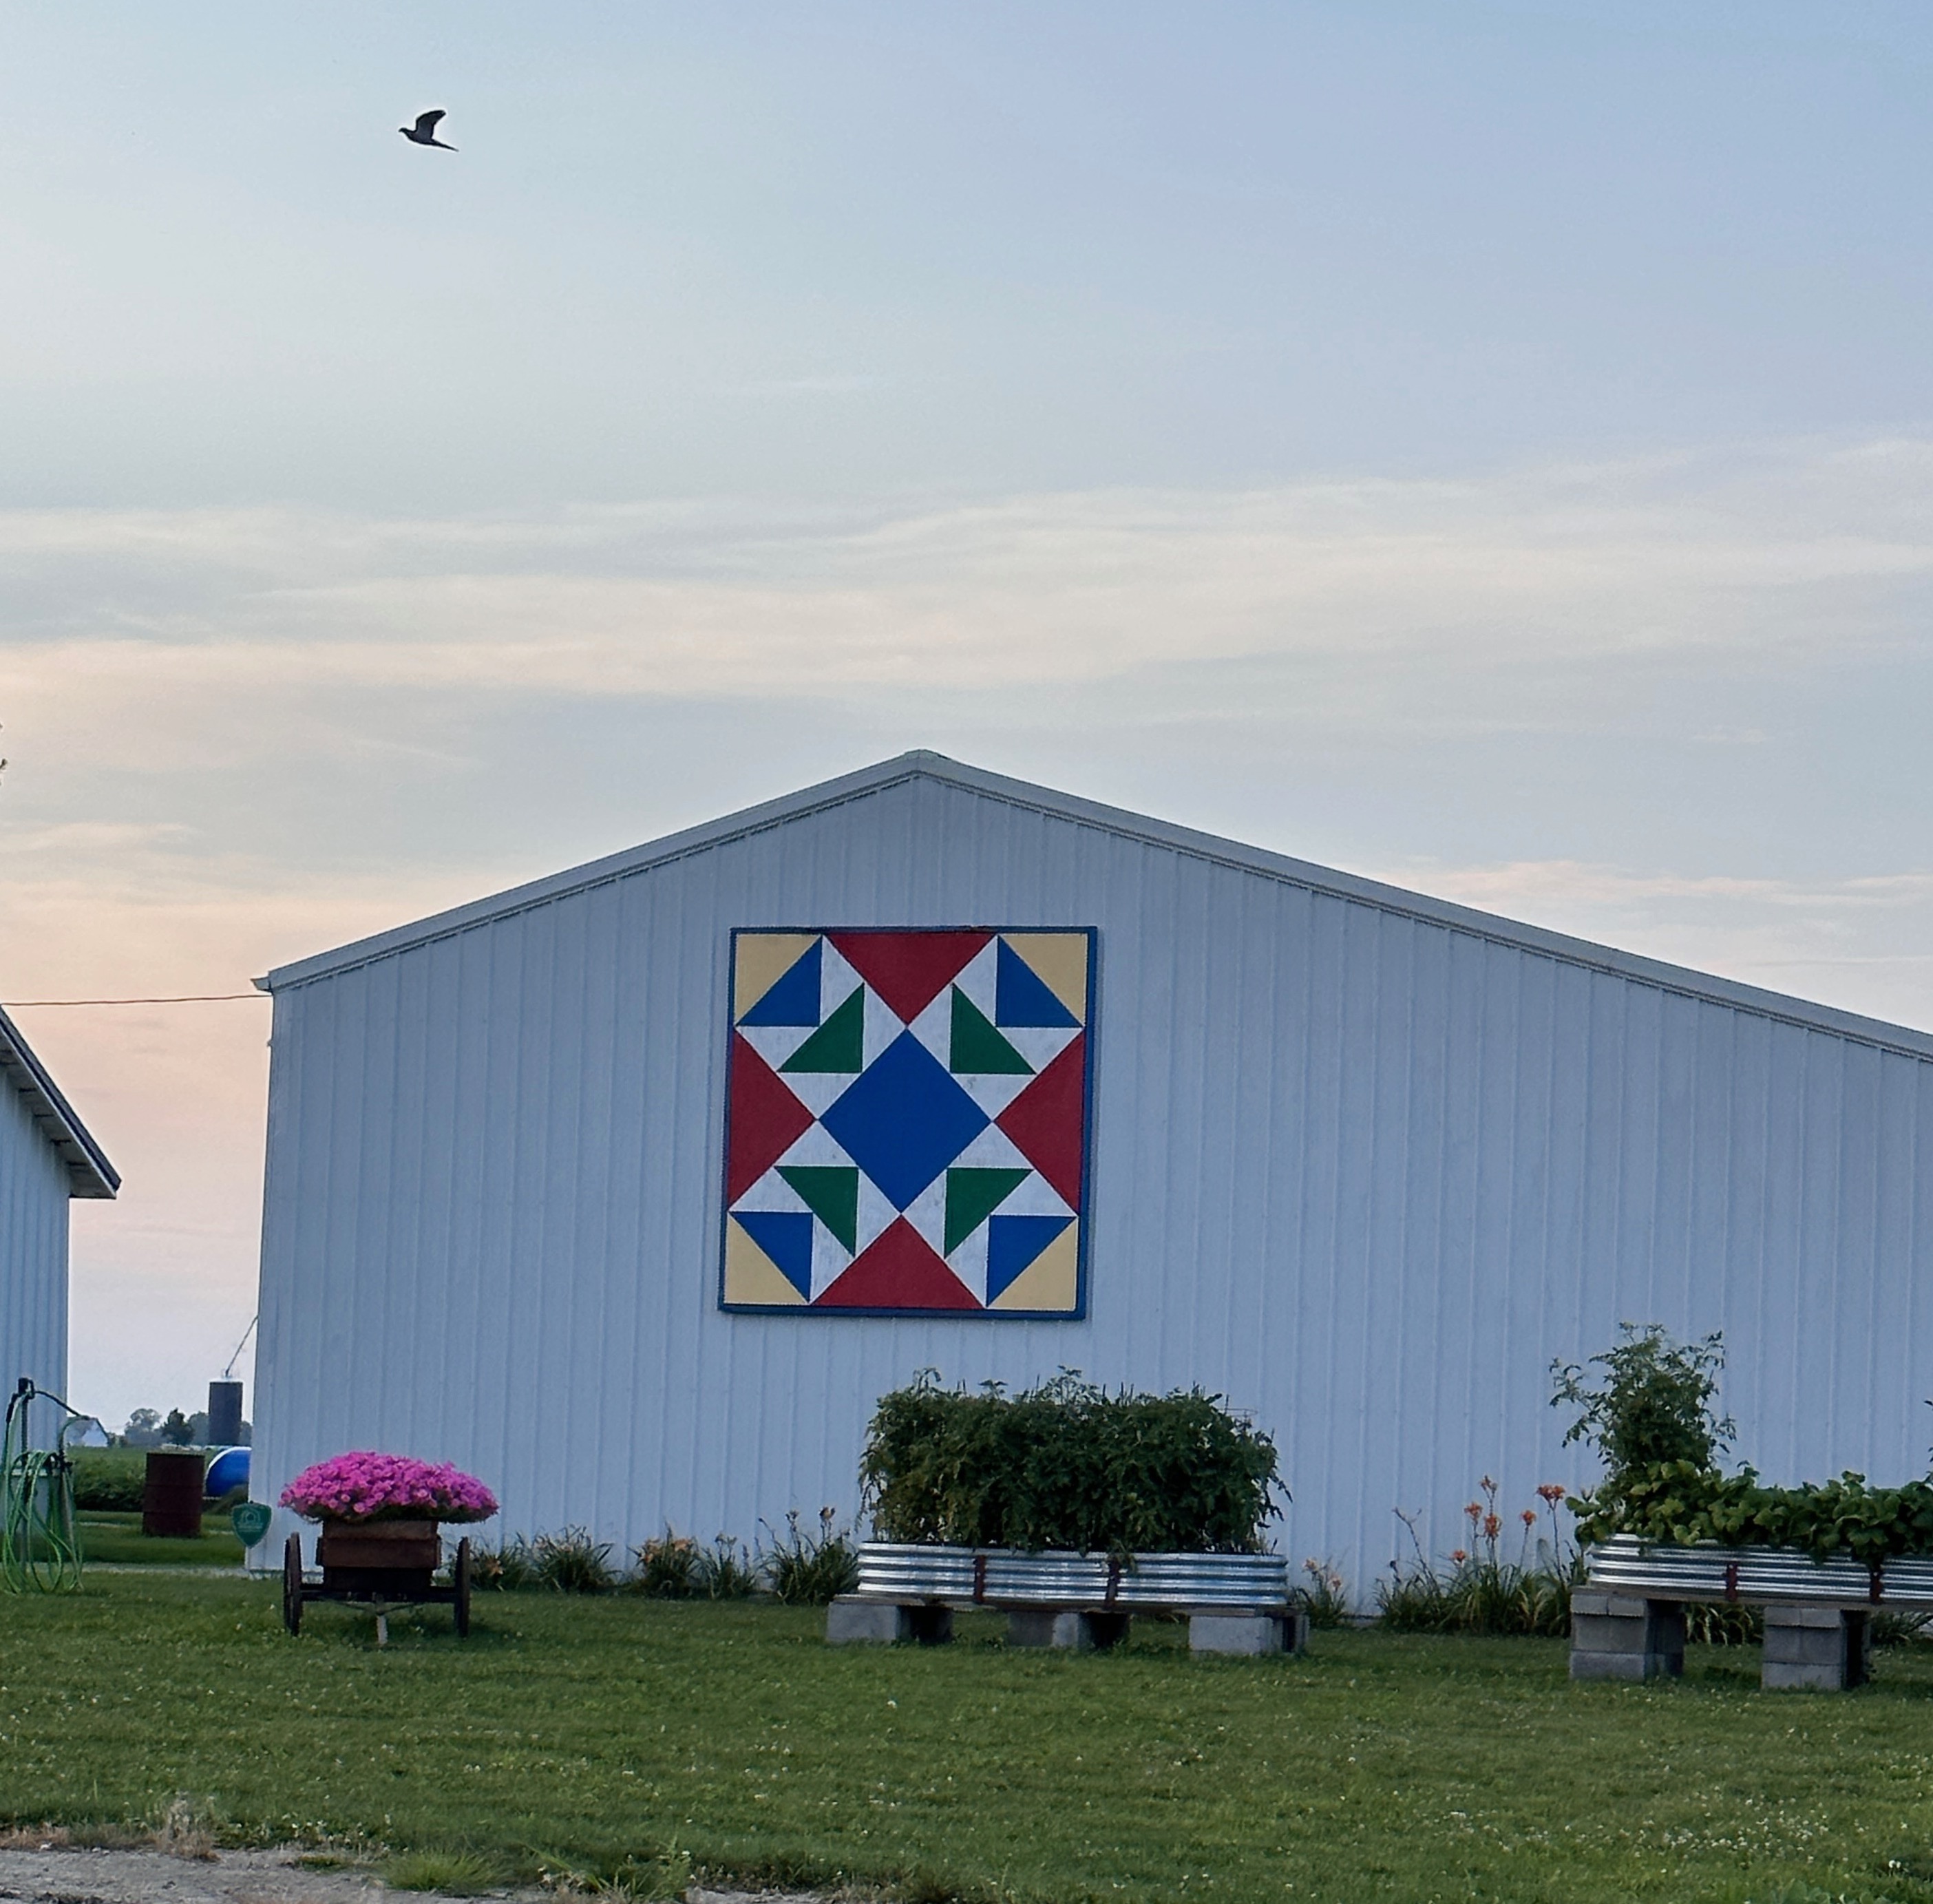 Have Barn Quilts Made a Comeback? – FanningSparks